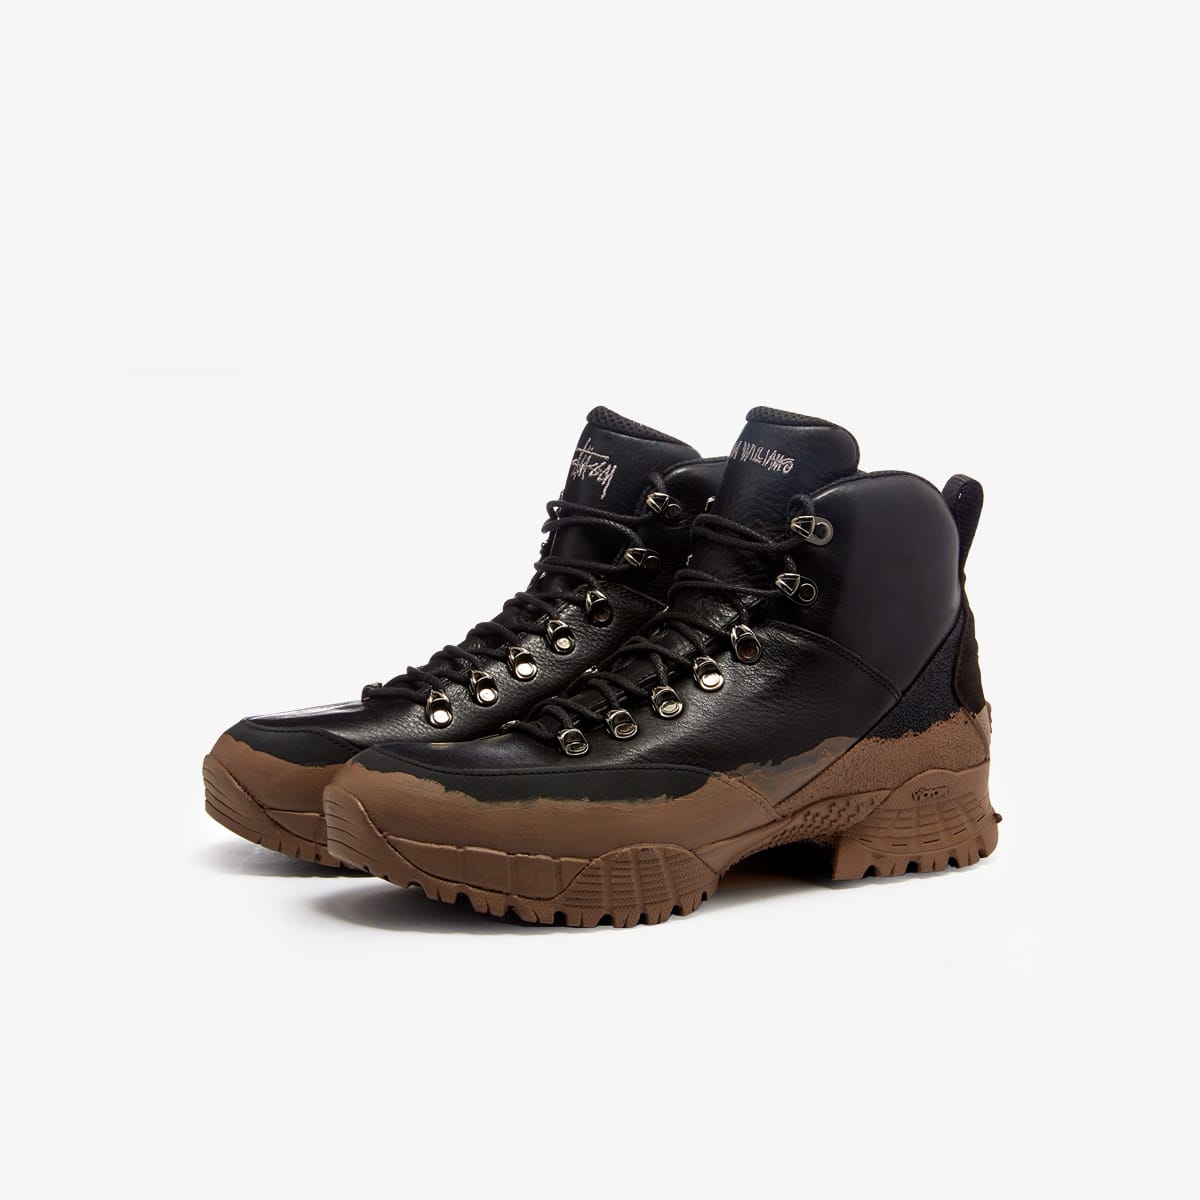 1017 ALYX 9SM x Stussy Hiking Boot (Black & Mud) | END. Launches